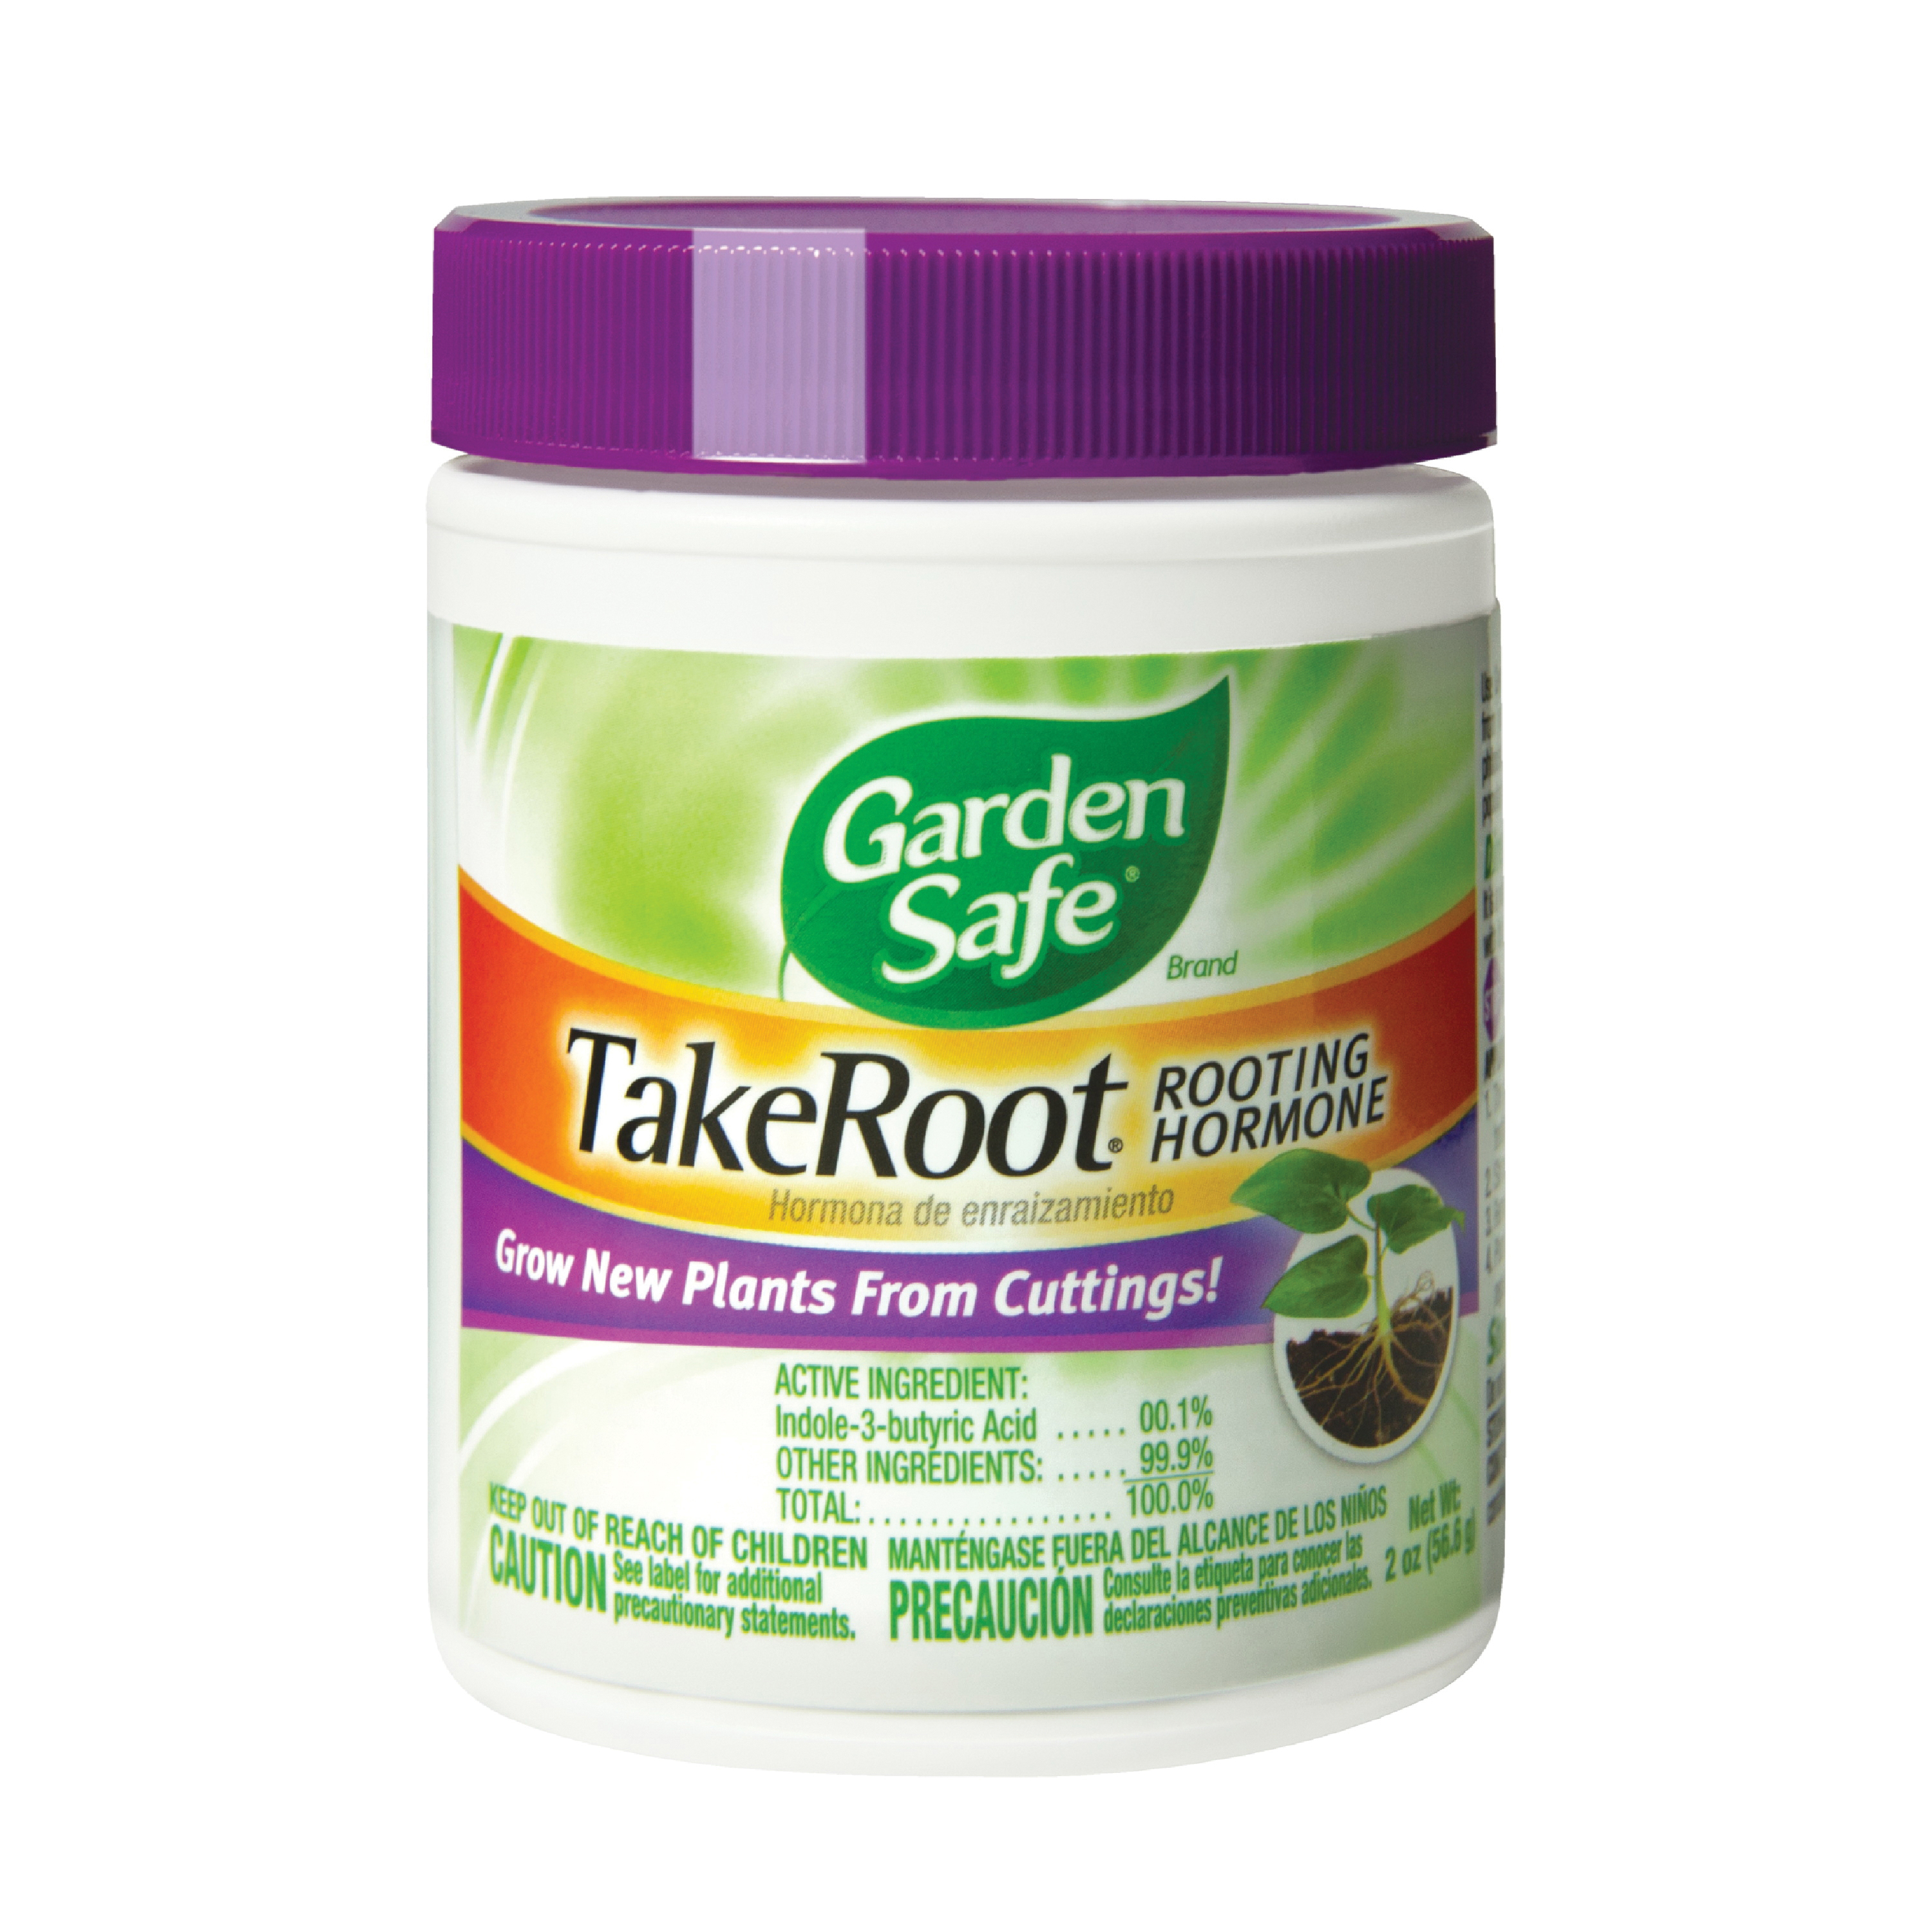 TakeRoot HG-93194 Rooting Hormone, 2 oz, Solid